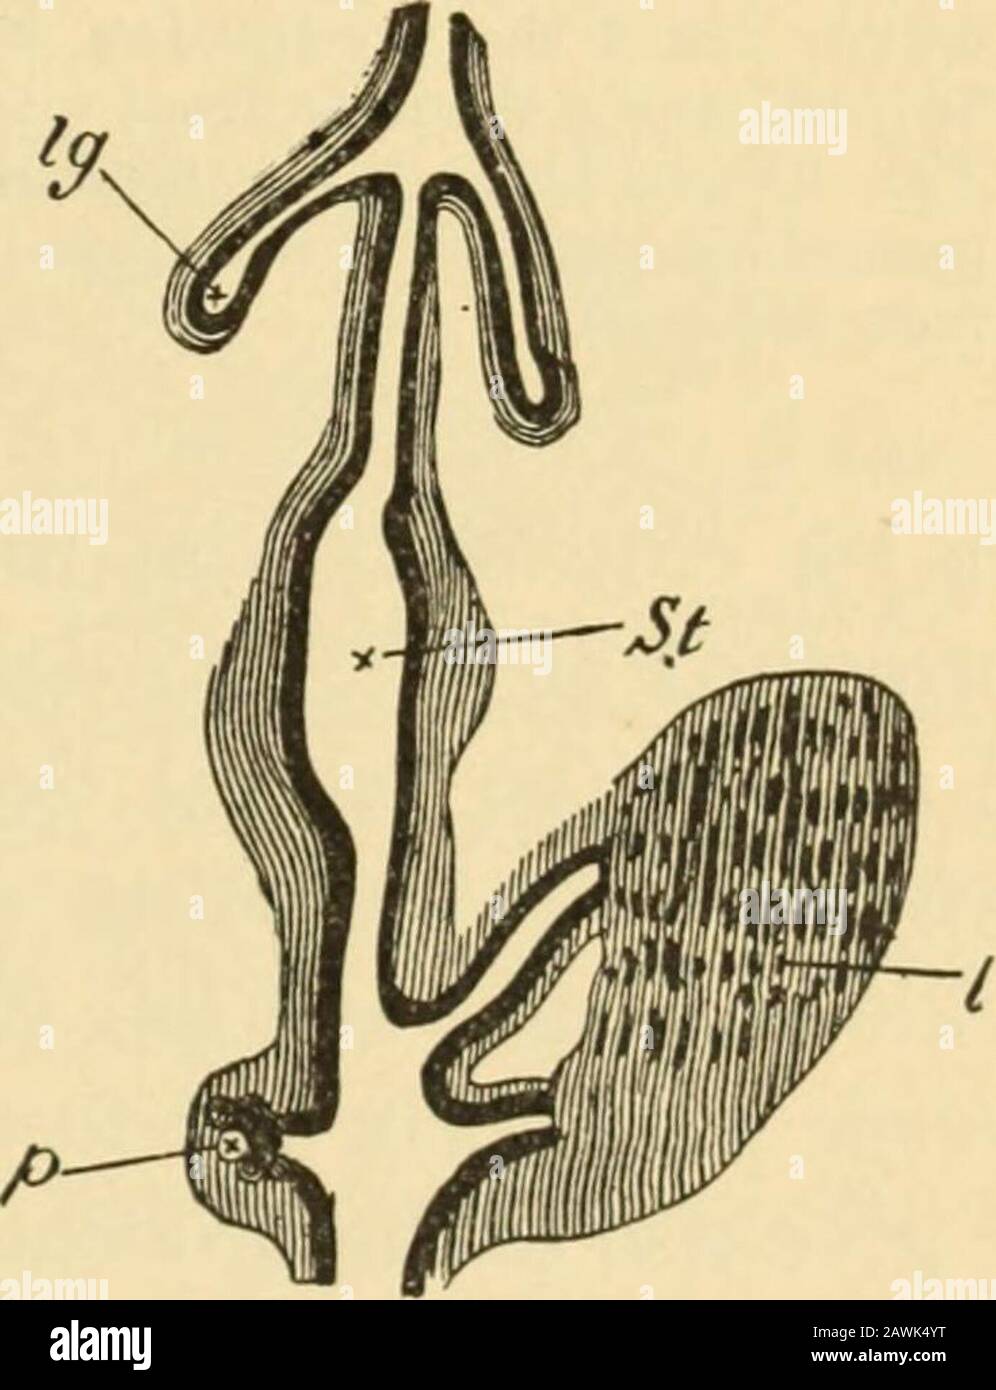 A system of obstetrics . Fig. 127.—(From Allen Thomson.) Sketch of Human Embryo of the Tenth Week, showing the coilof intestine in the umbilical cord. The amnion and chorion have been opened and the embryopulled aside from them, v, umbilical vesicle, connected with the intestine, i, by a narrowcord. The smaller figure shows the proximal portion of the umbilical cord more magni-fied: i, intestine; vi, vitello-lntestinal duet. Fig. 128.—(From Balfour, after GStte.) Diagram of Part of the Digestive Tract of a Chick Embryoof the Fourth Day. The black line indicates hypoblast: the shaded portion, m Stock Photo